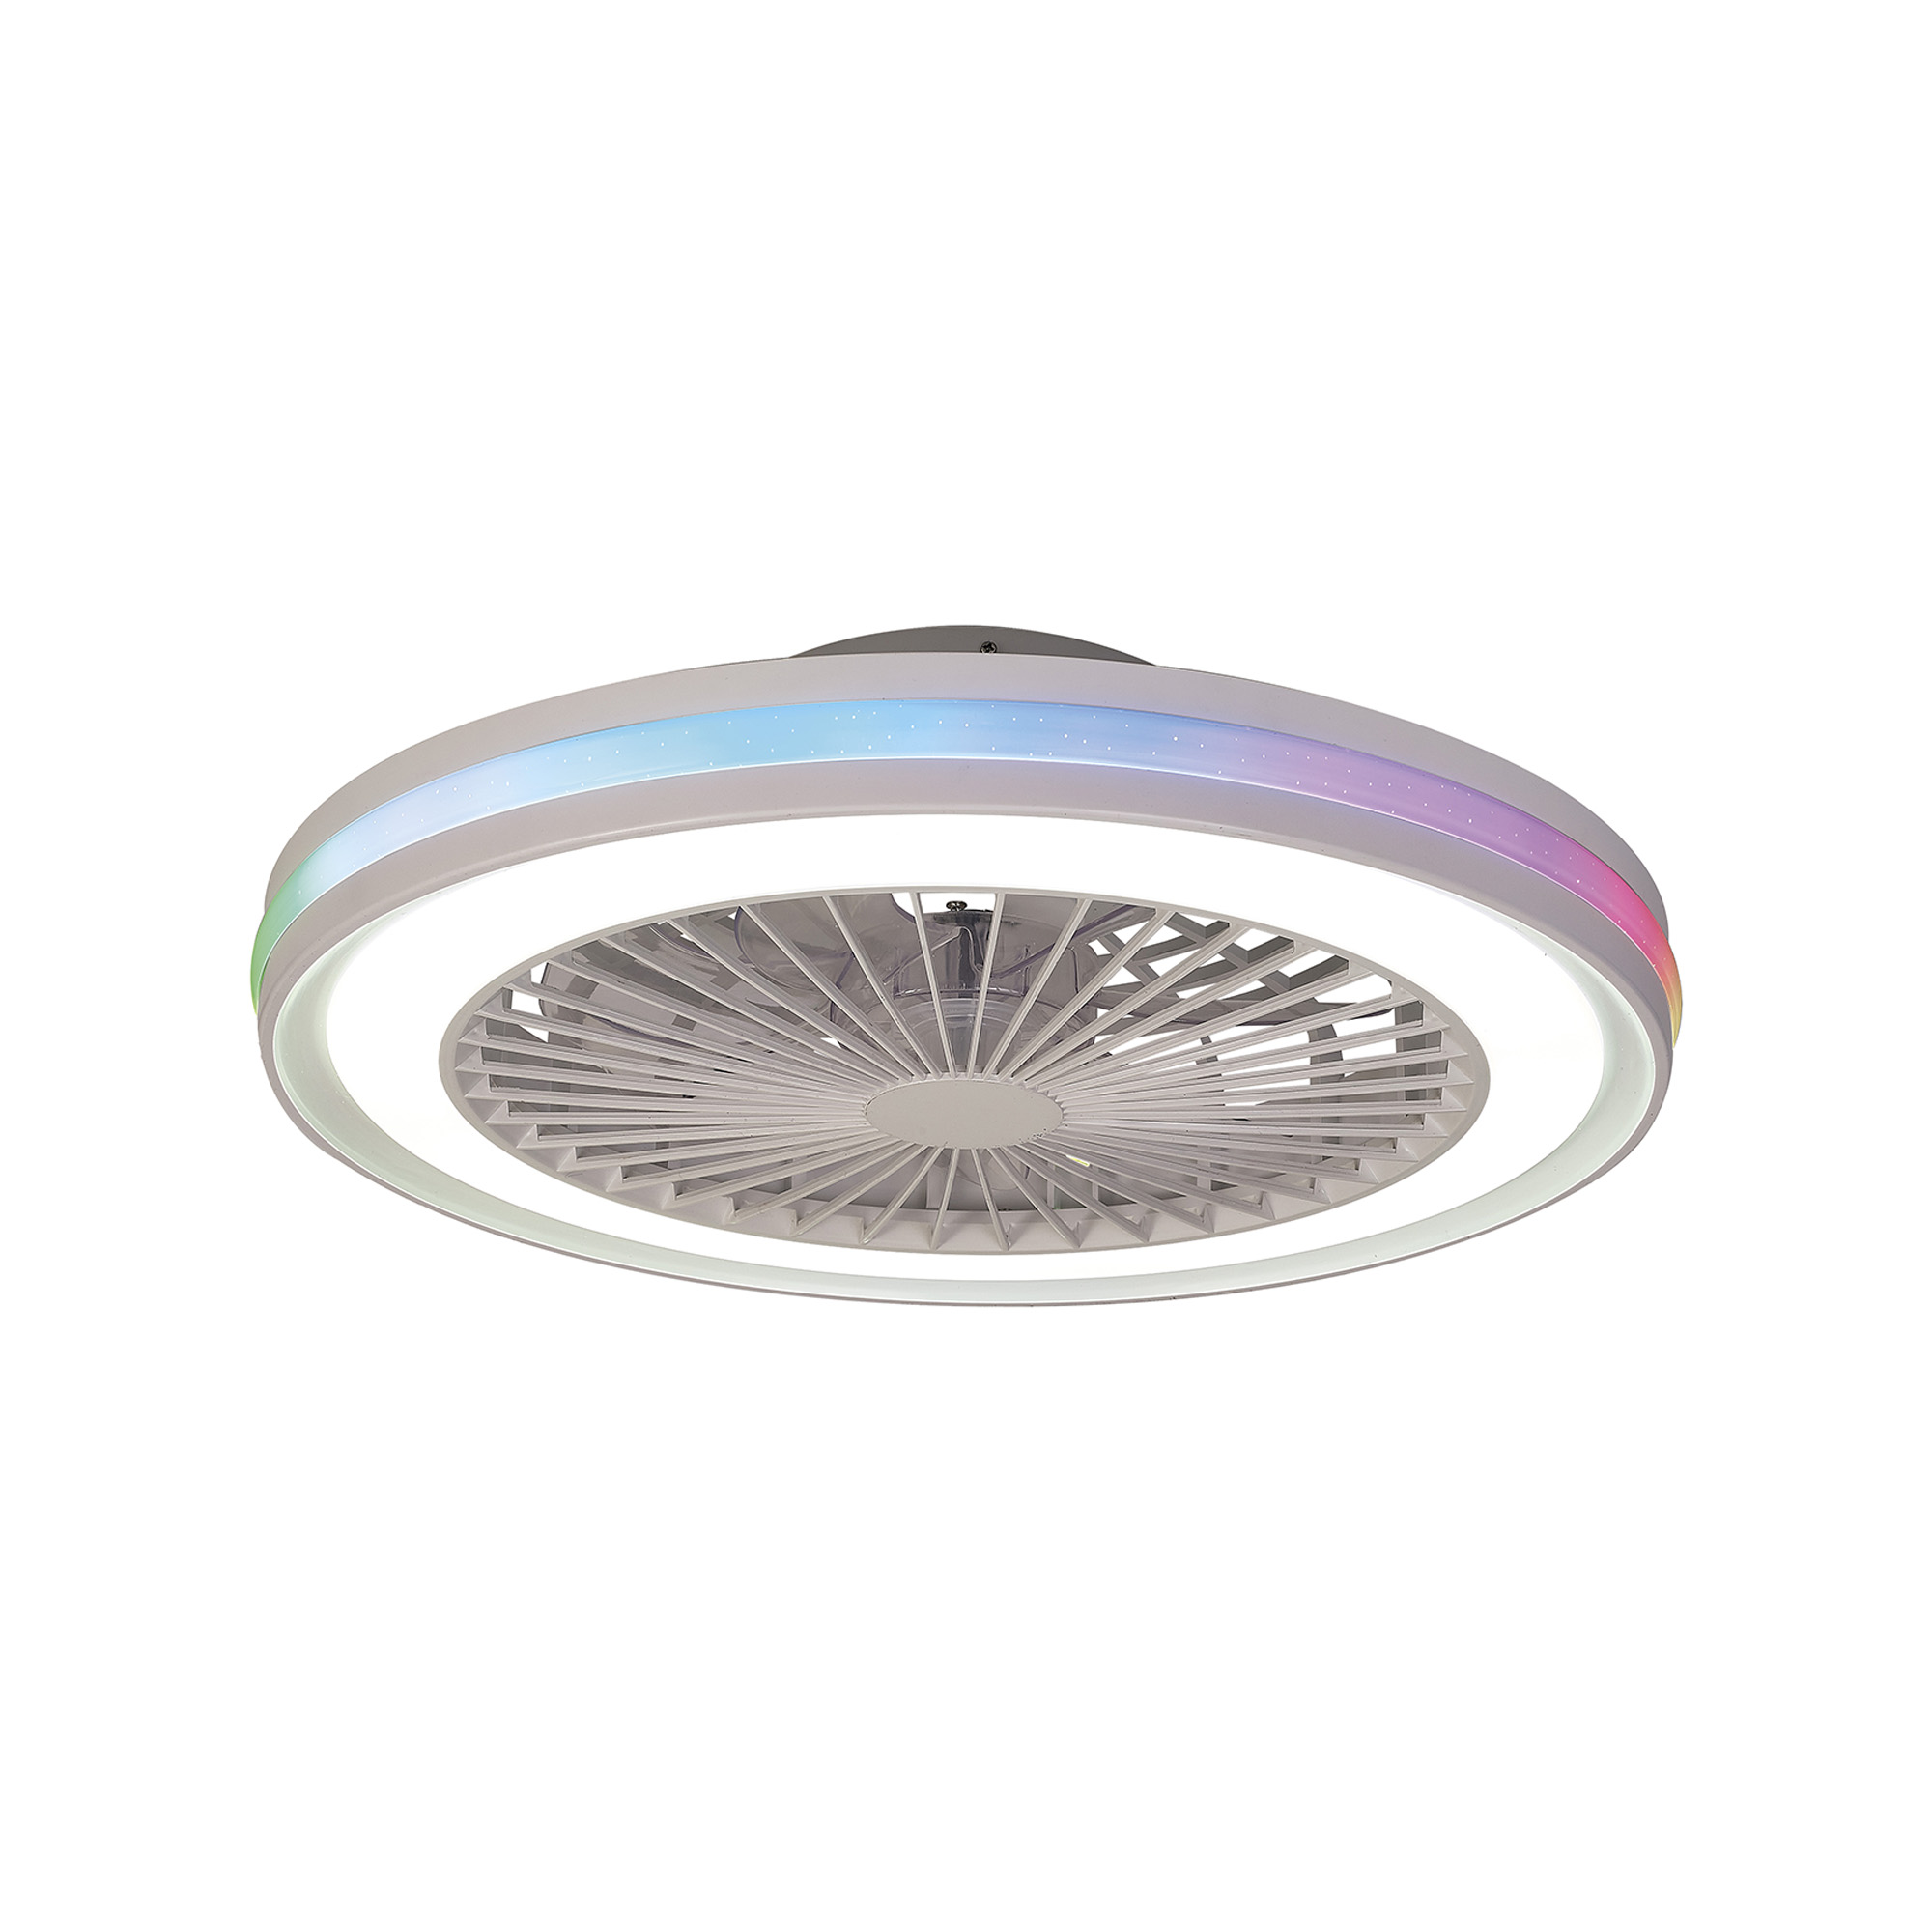 M8291  Gamer 40W LED Dimmable White/RGB Ceiling Light & Fan; Remote